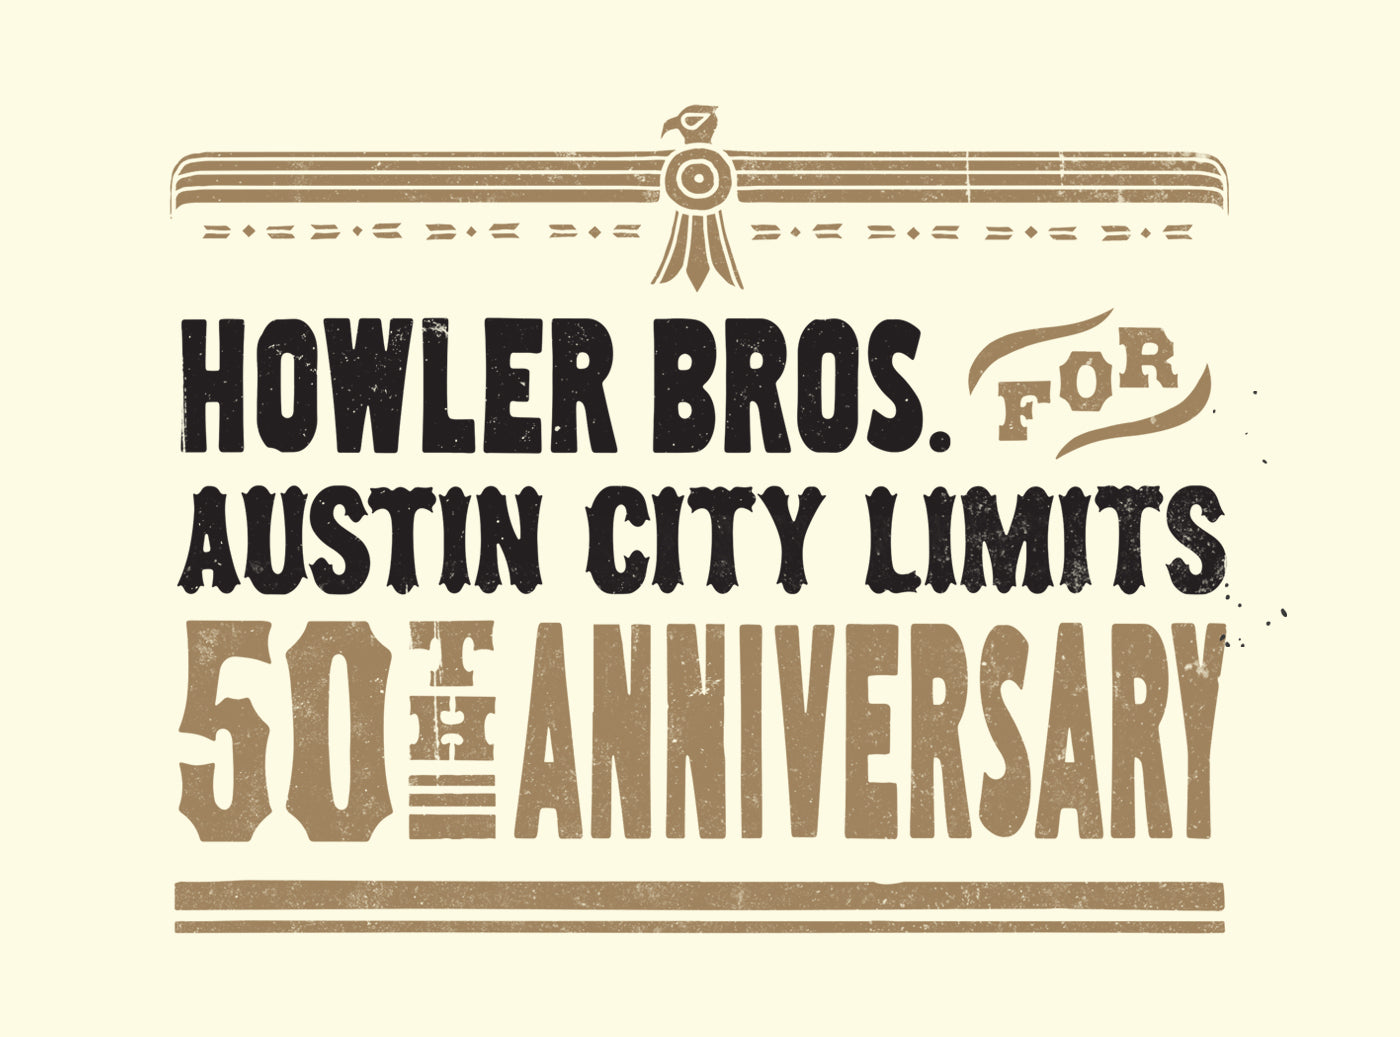 Our Favorite Memories of 50 Years of Austin City Limits